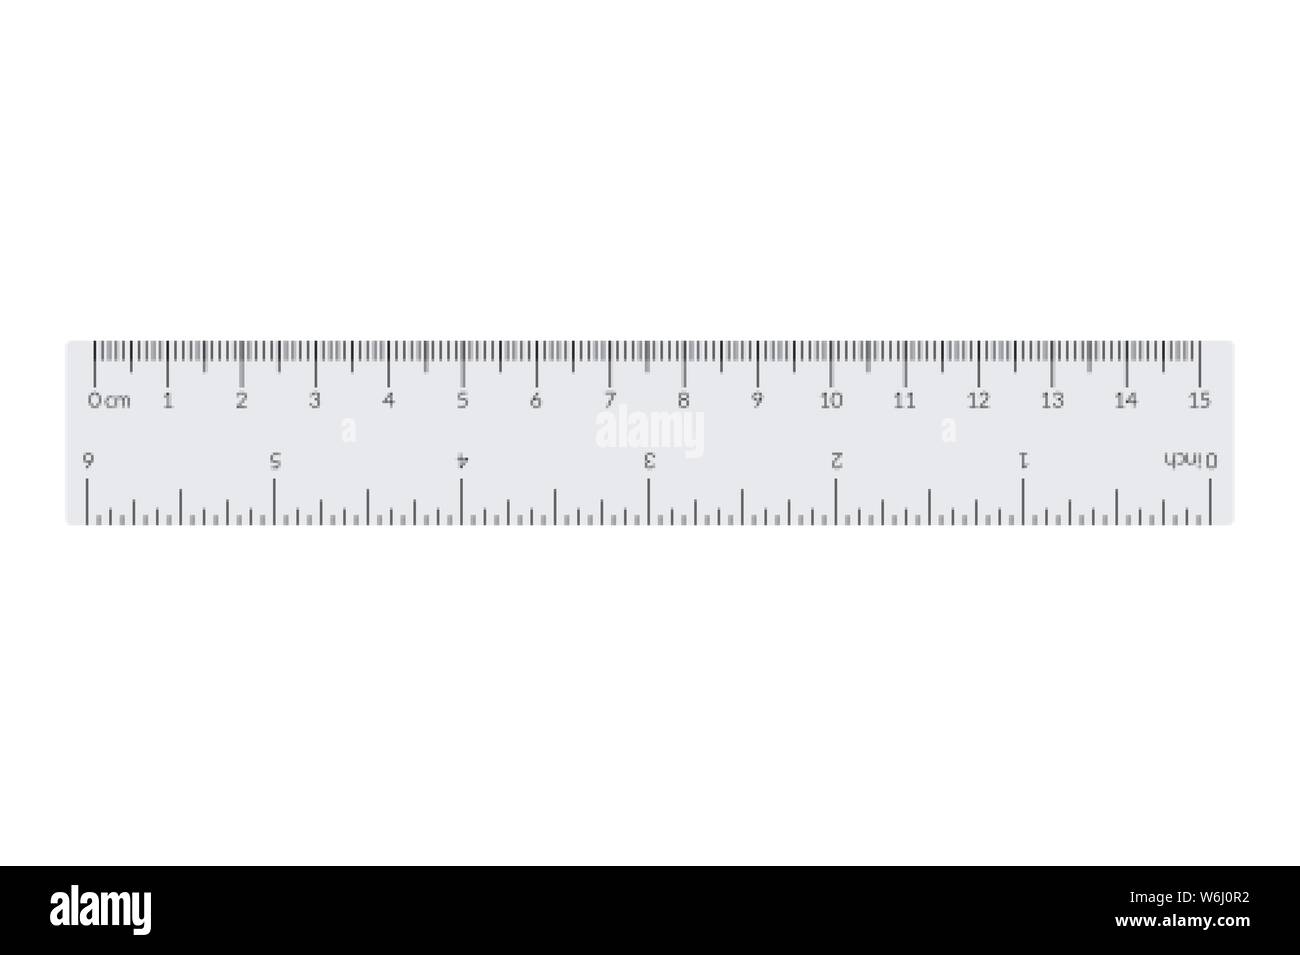 Metric imperial rulers centimeter and inch Vector Image